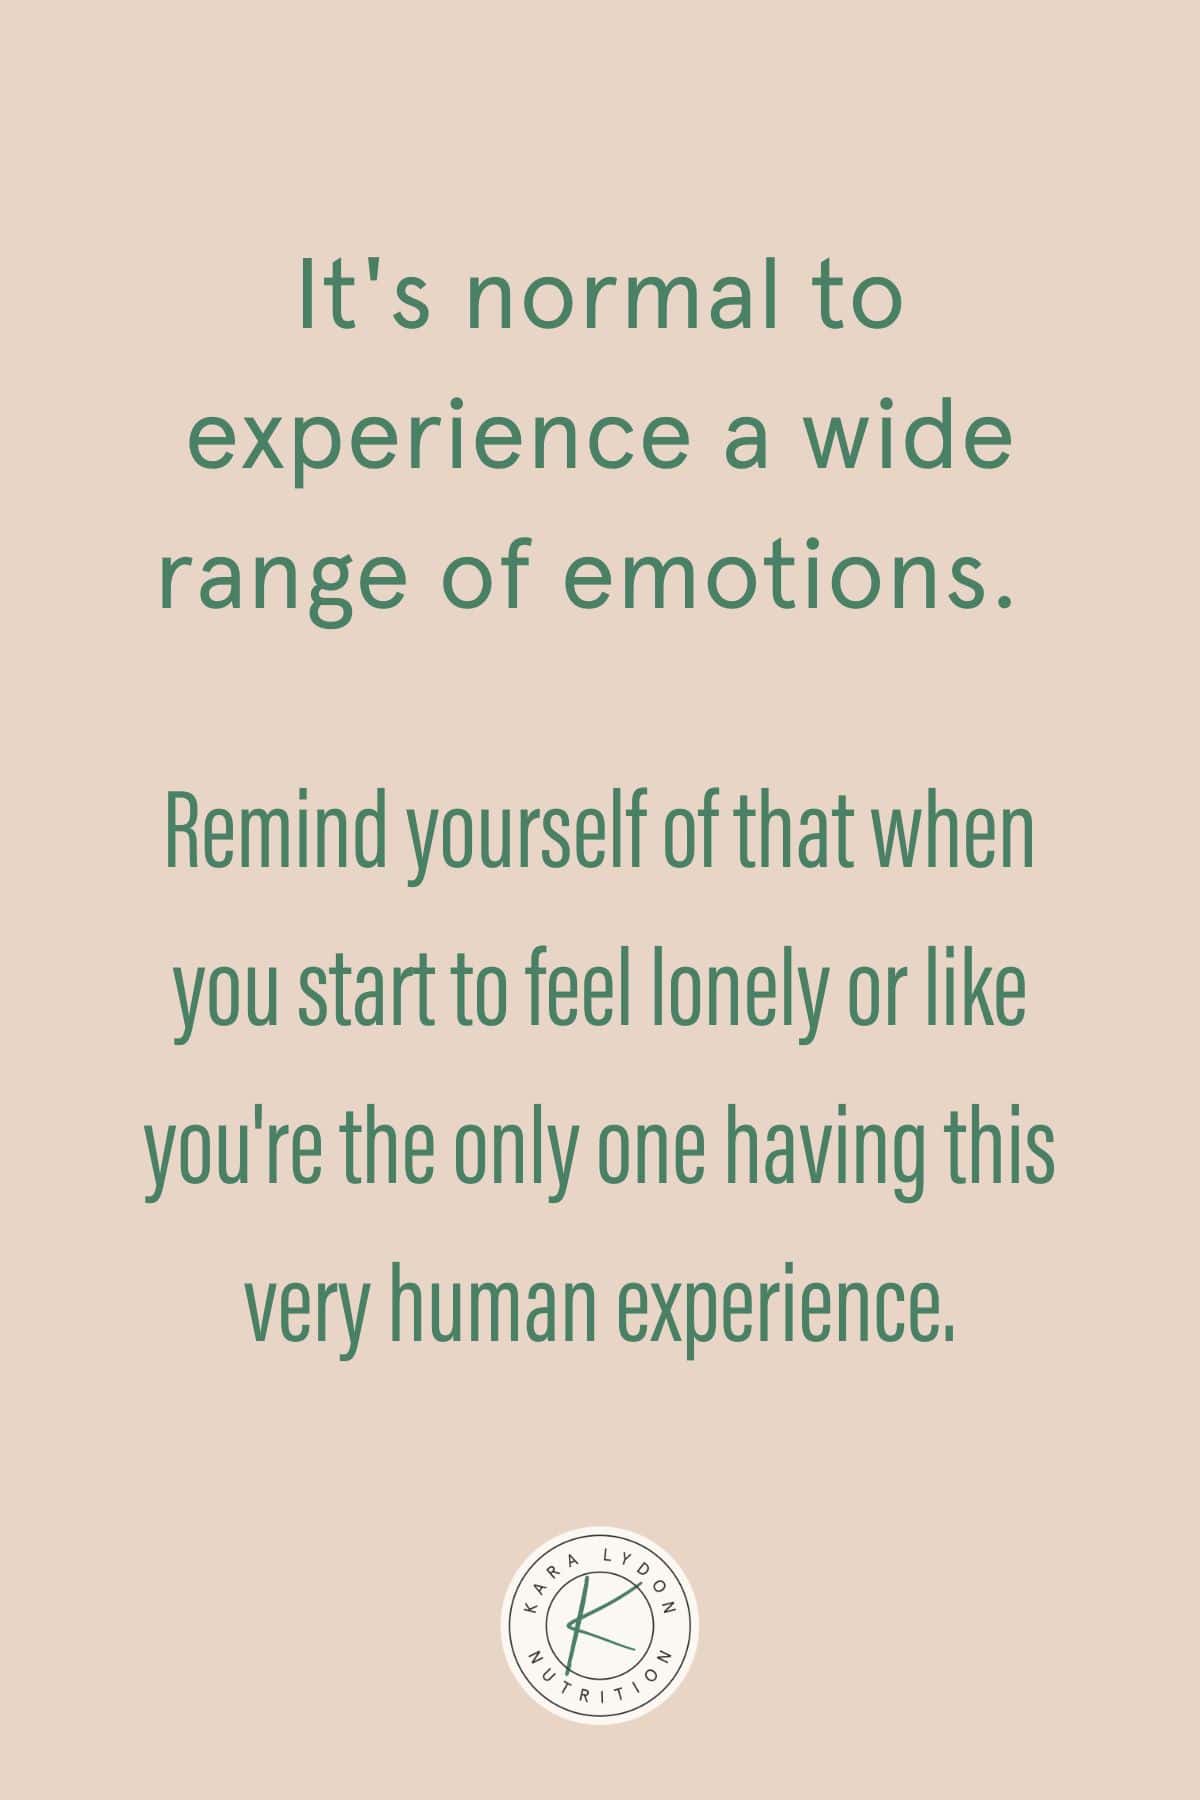 graphic with quote: "It's normal to experience a wide range of emotions. Remind yourself of that when you start to feel lonely or like you're the only one having this very human experience."